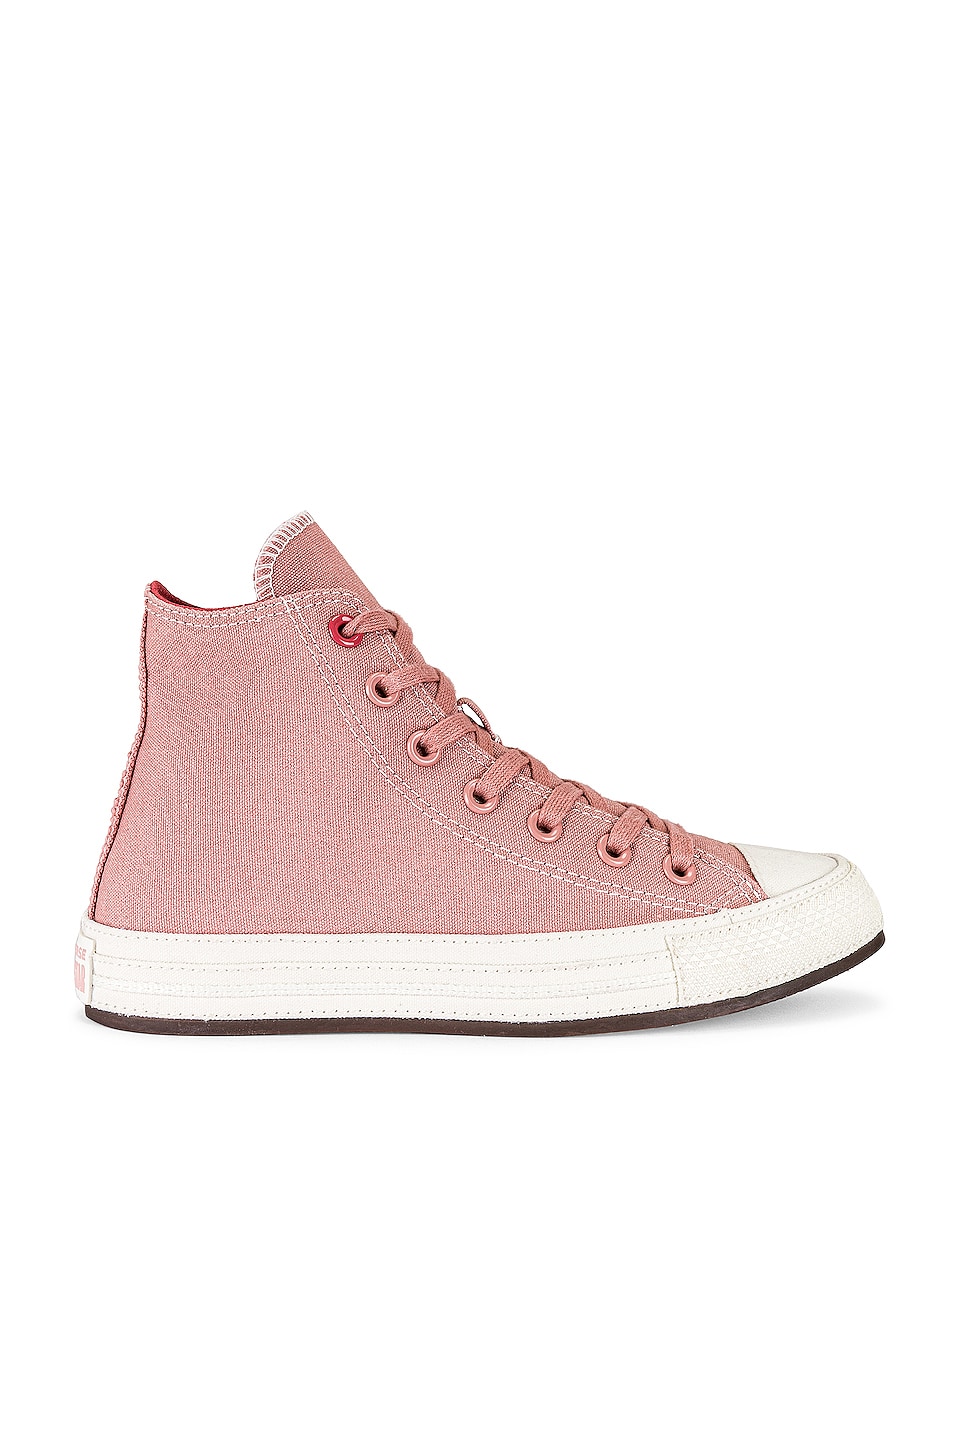 Converse Chuck Taylor All Star Workwear Textiles Sneaker in Canyon Dusk,  Egret, & Rhubarb Pie | REVOLVE